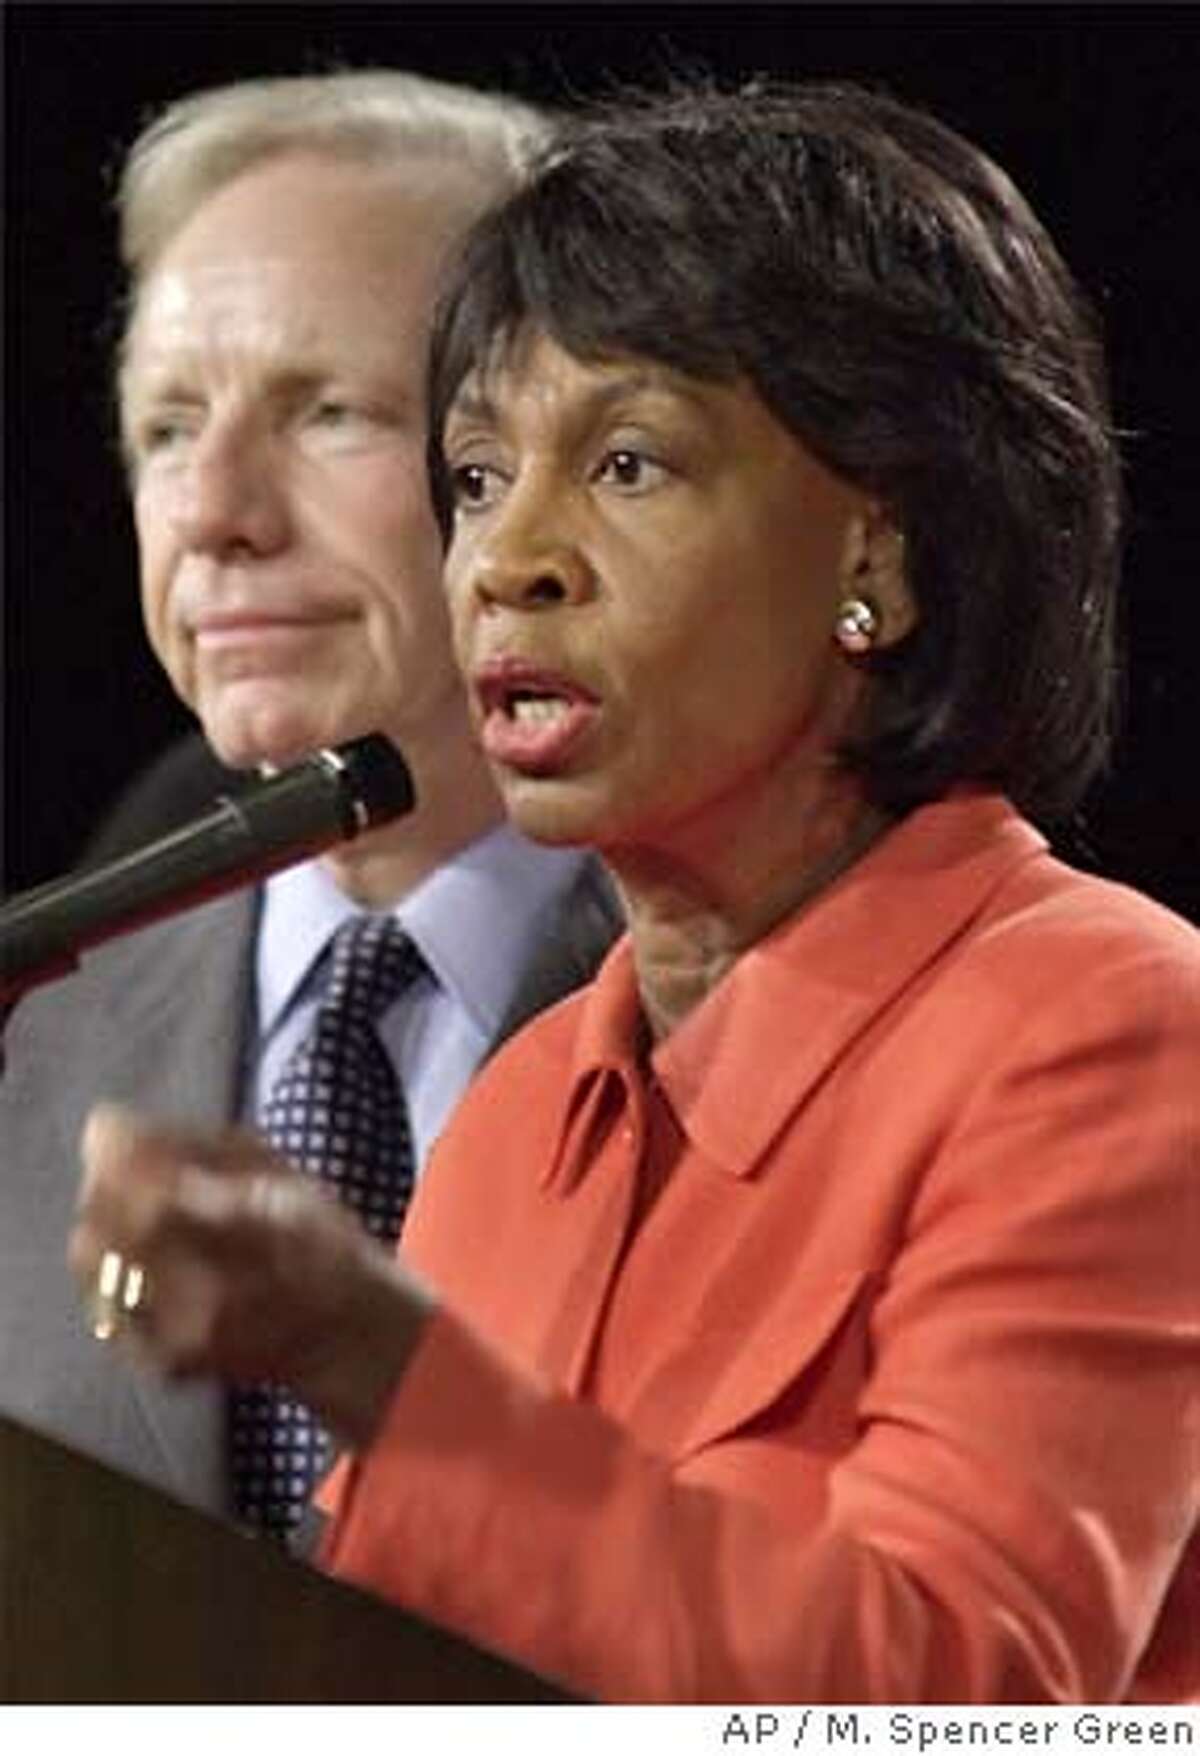 Democratic vice presidential hopeful Sen. Joseph Lieberman stands with Rep. Maxine Waters, D-Calif., as she addresses the Democratic National Committee's African-American Caucus Tuesday, August, 15, 2000, at the Democratic National Convention in Los Angeles. Lieberman spoke to the group and led them in singing happy birthday to the Waters.(AP Photo/M. Spencer Green) Ran on: 07-01-2005 Rep. Richard Pombo Ran on: 07-01-2005 Rep. Richard Pombo Ran on: 07-01-2005 Rep. Richard Pombo CAT